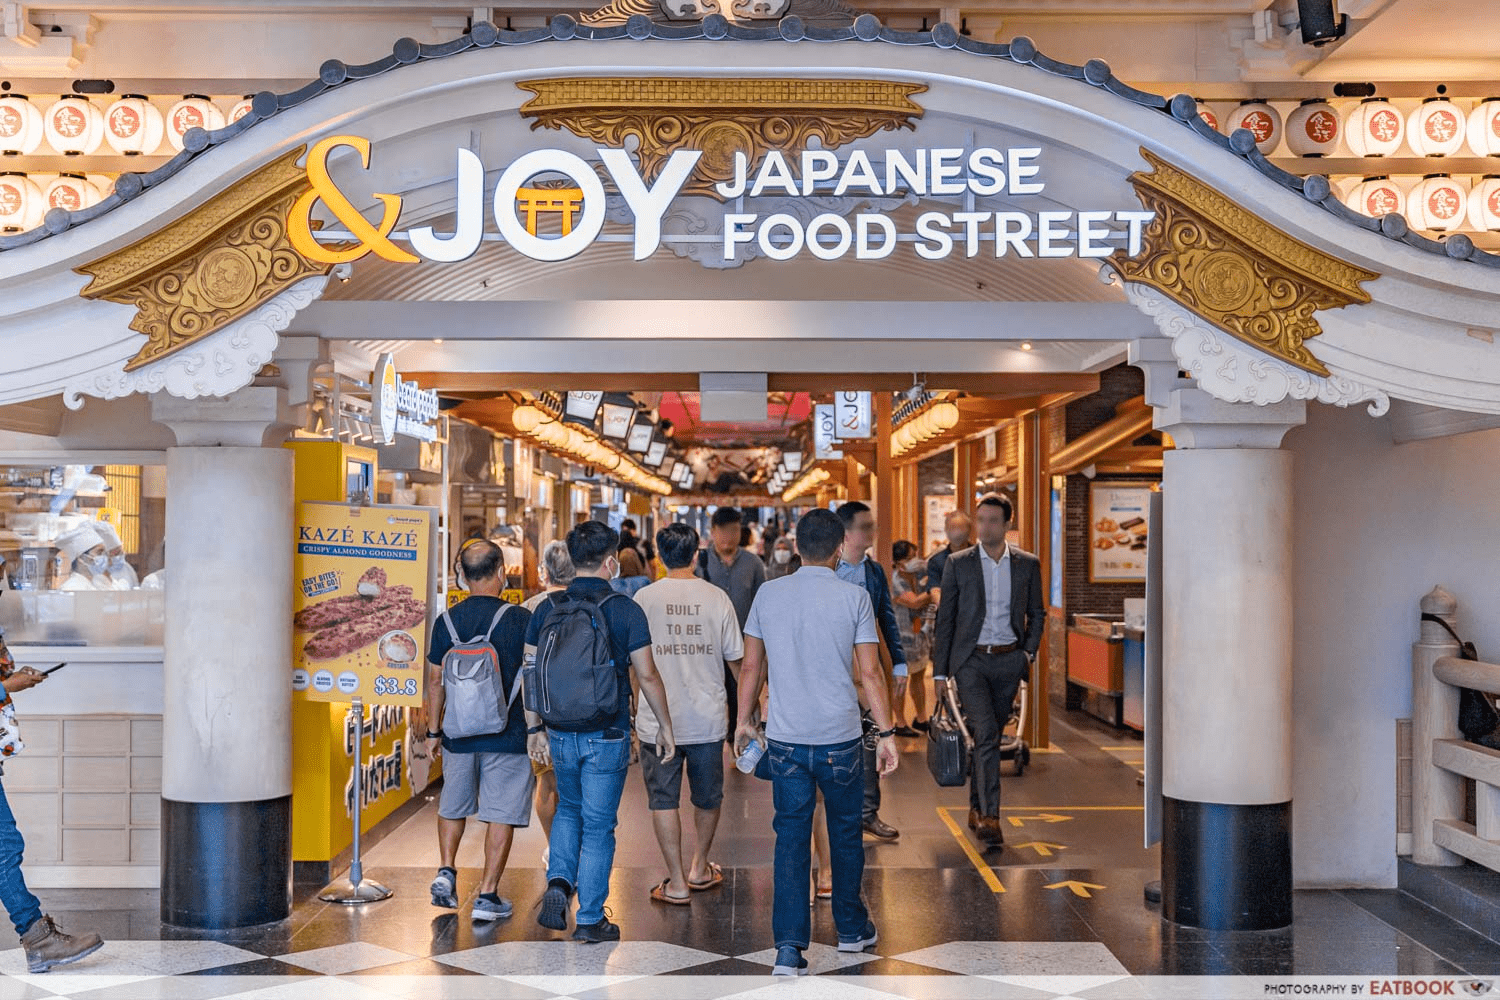 Japanese food street in Jurong point - heartland malls in Singapore